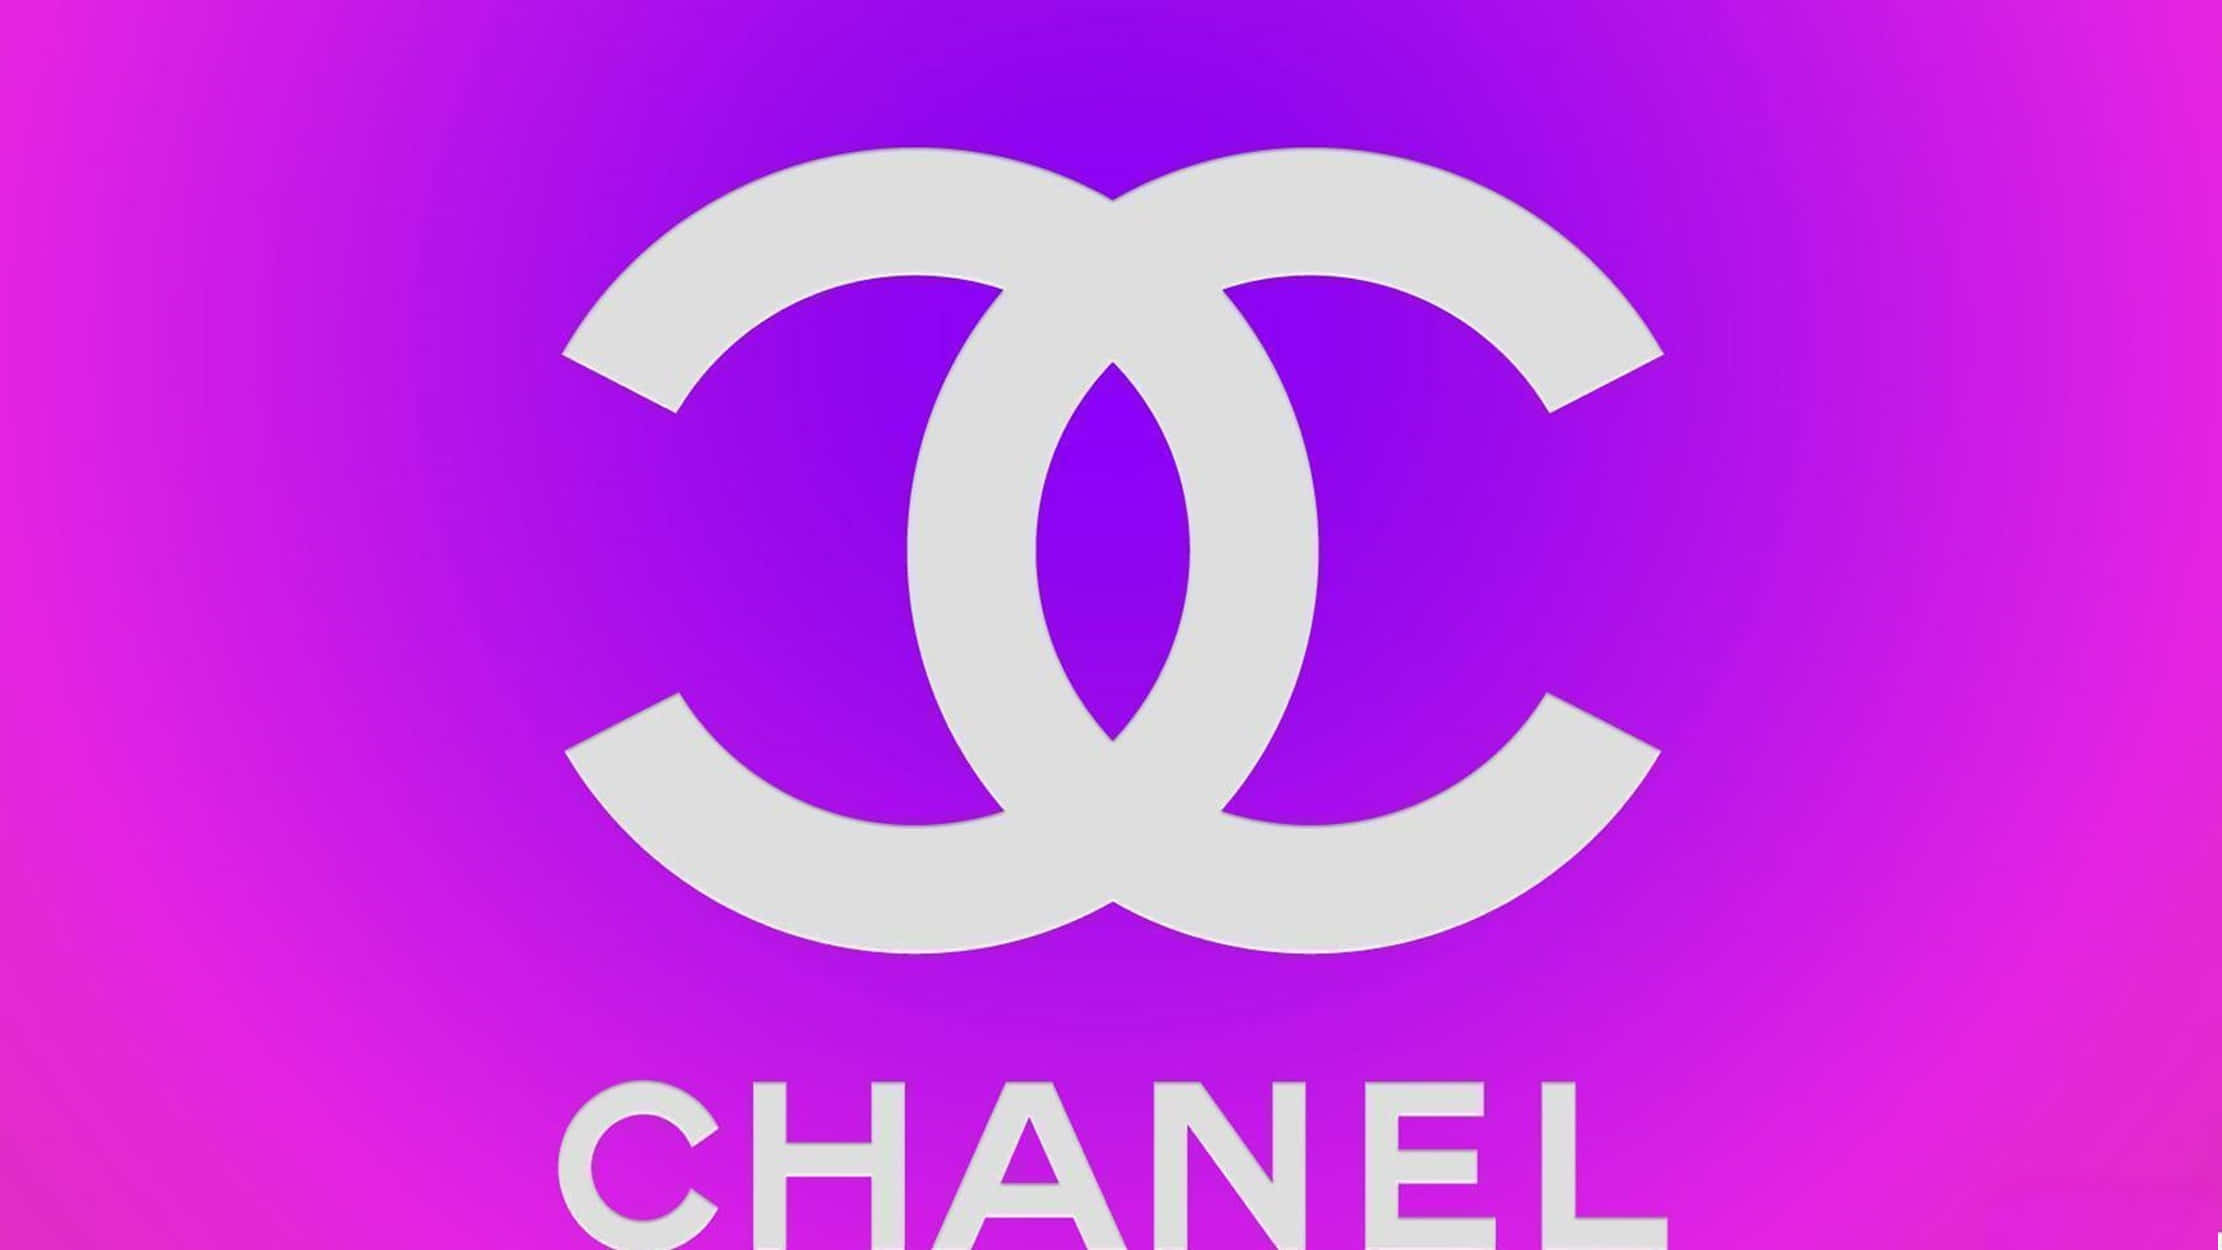 Chanelgirly Logo In German Would Be 